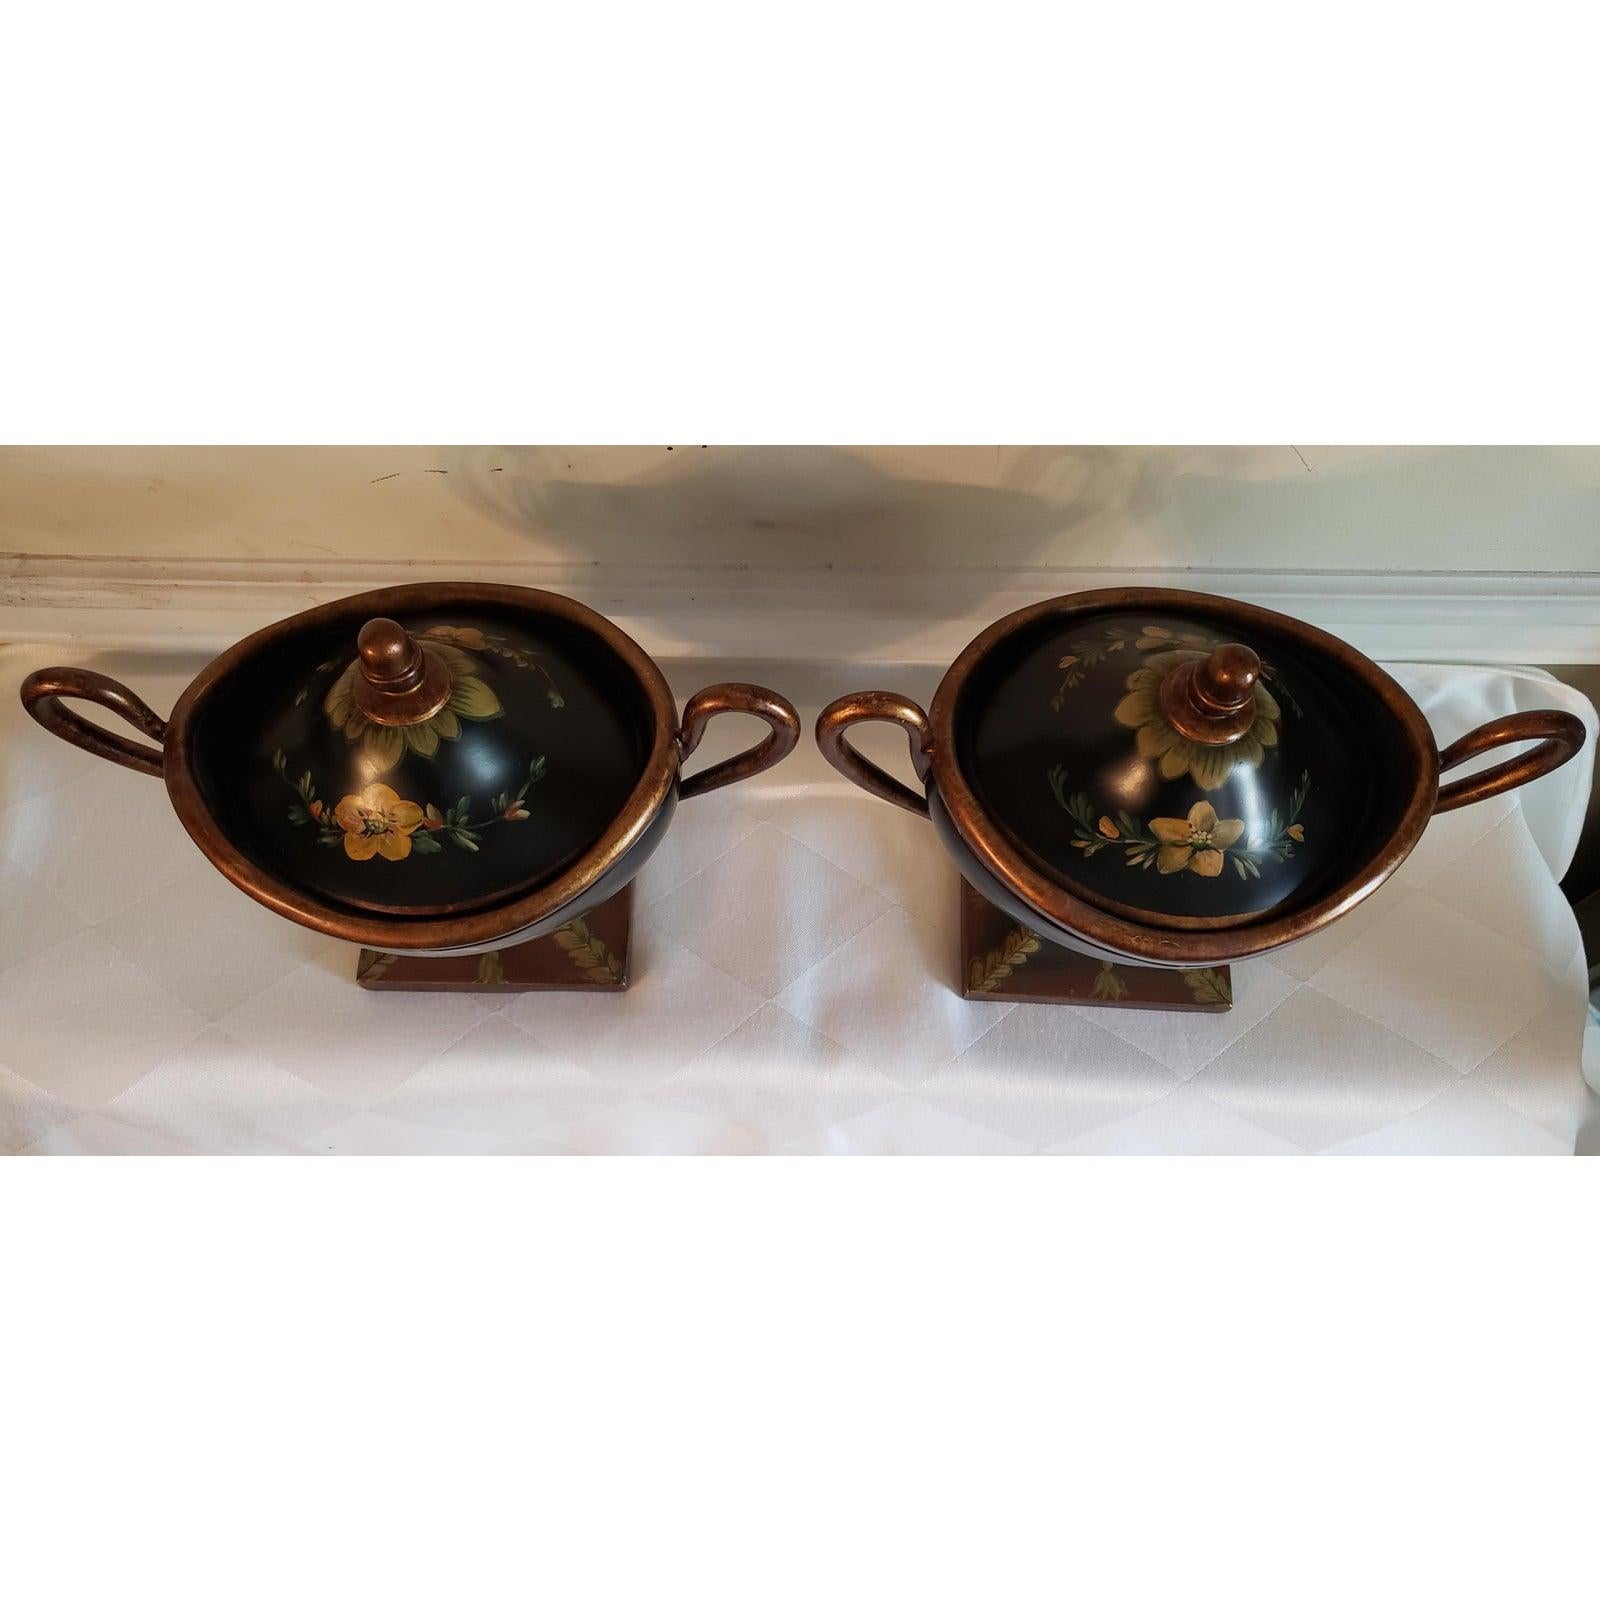 Anglo-Japanese Vintage 1950s Hand Painted Decorative Ceramic Urns, a Pair For Sale